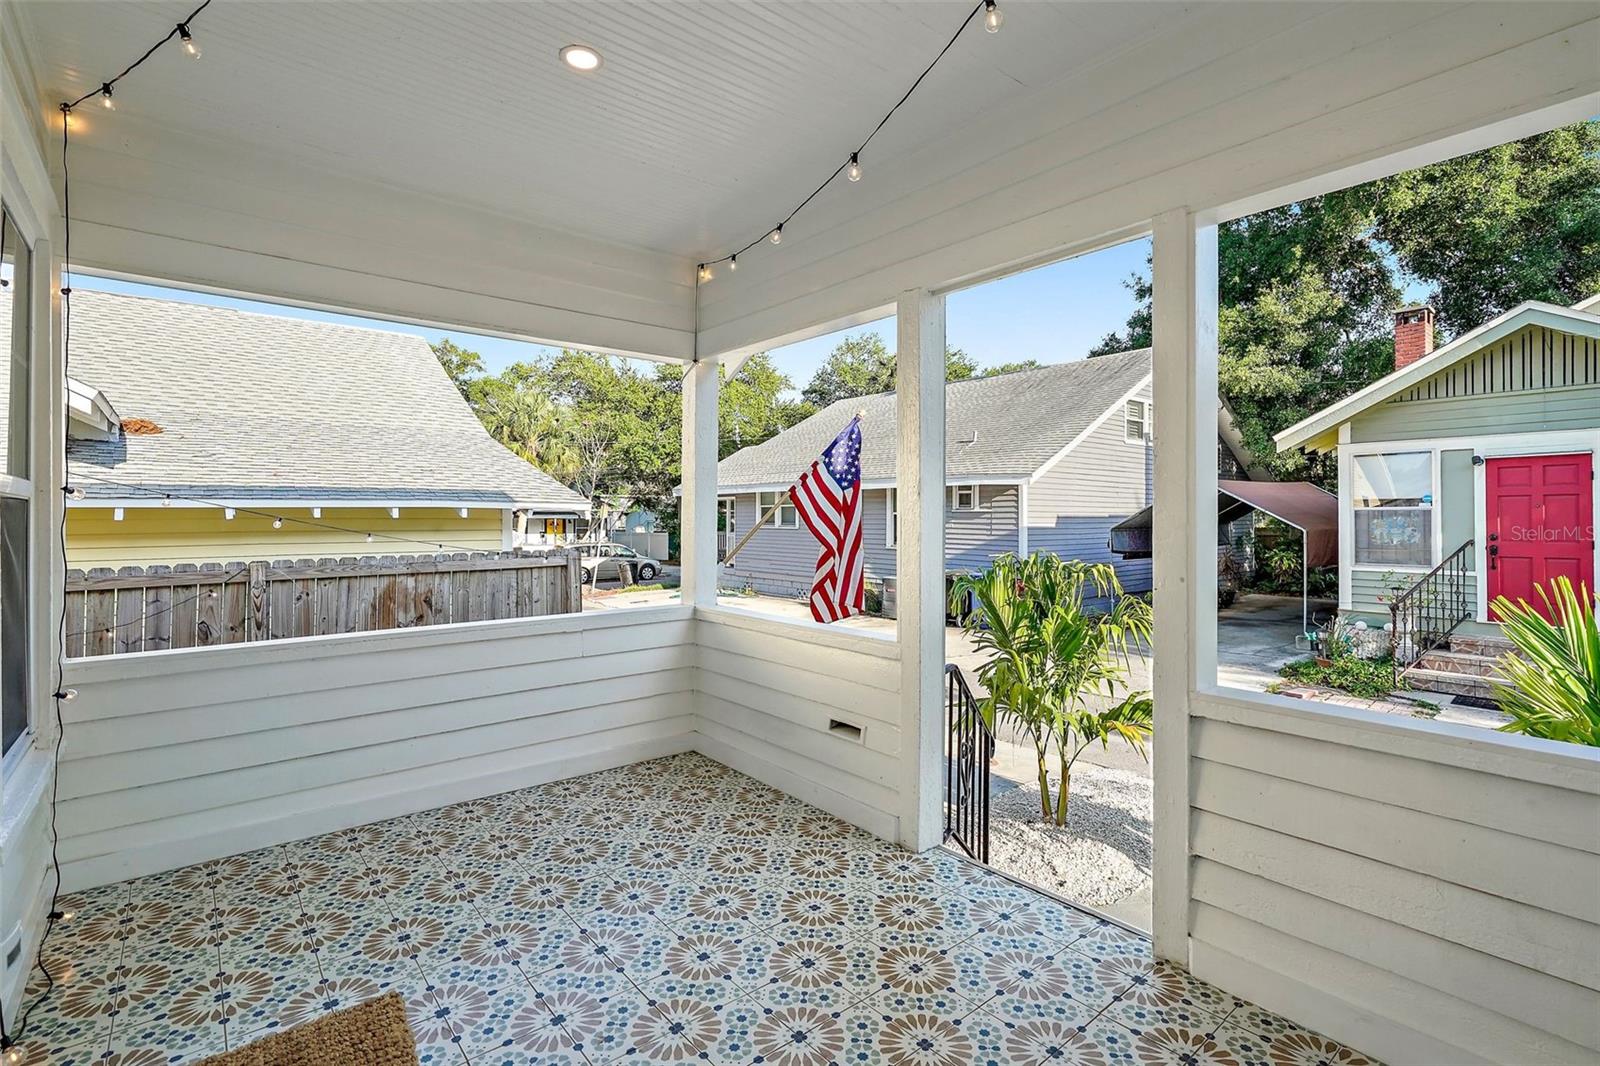 Front Porch with 1920's inspired tiles